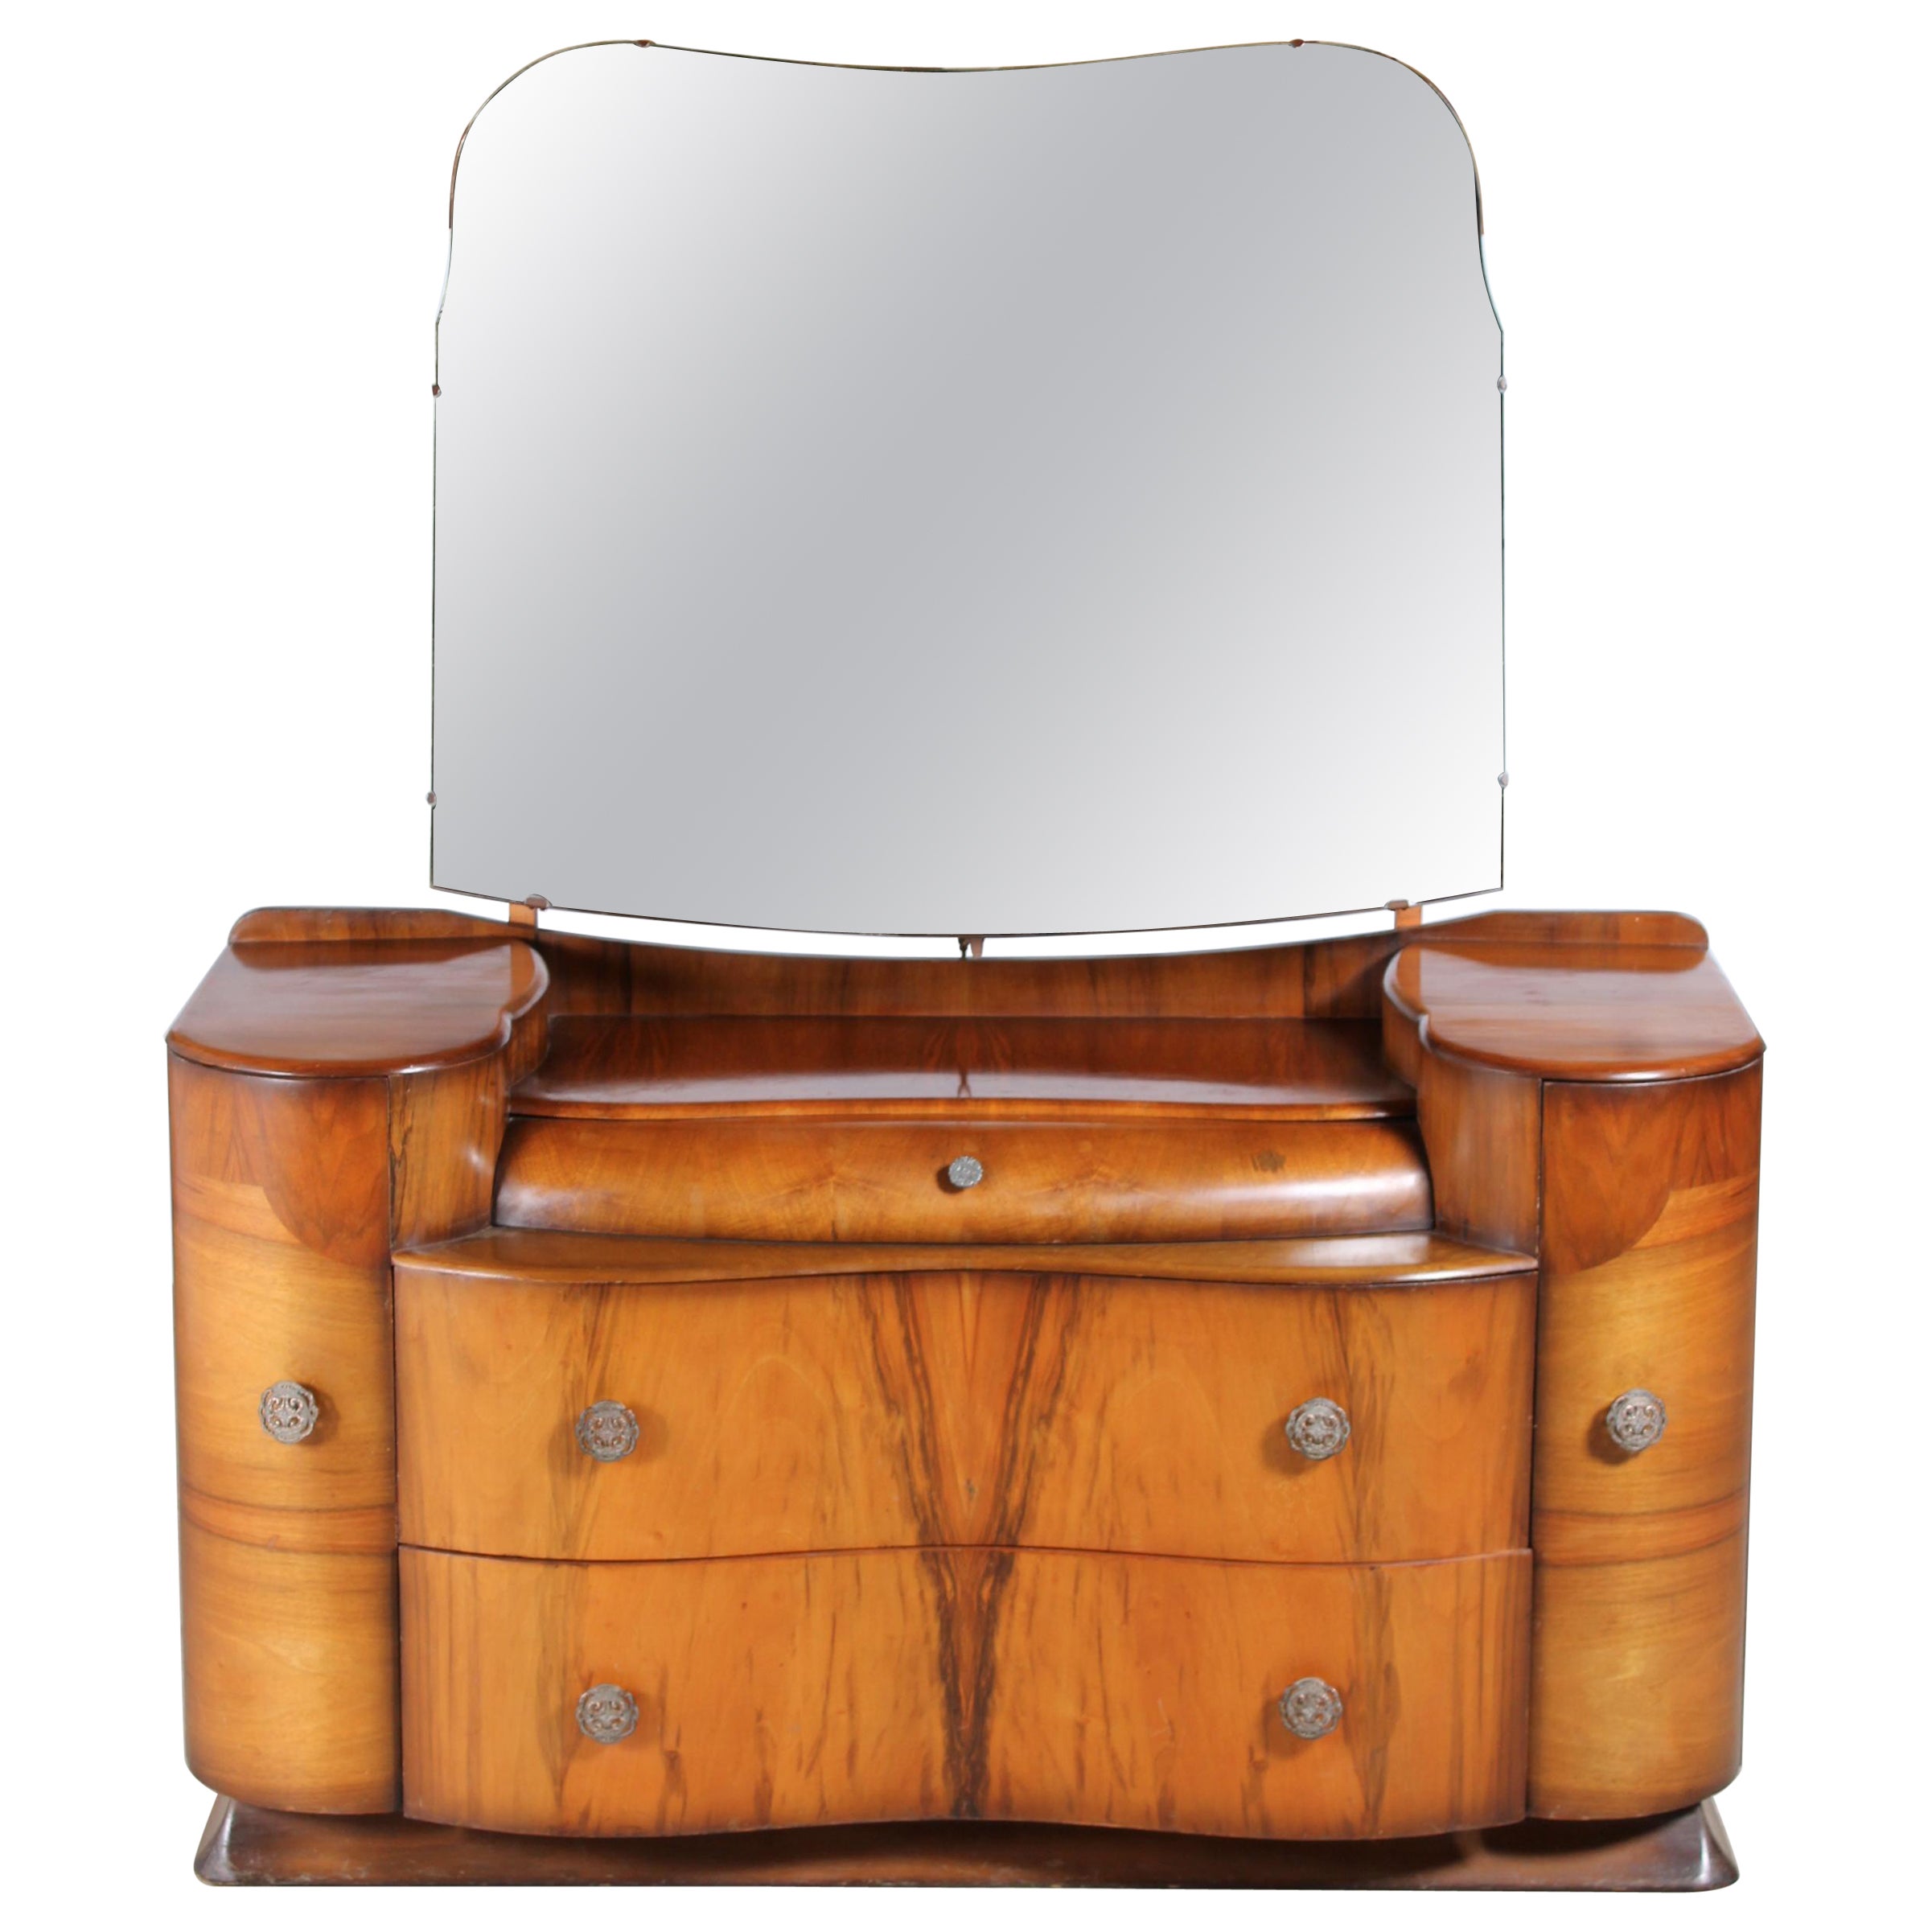 English Art Deco Style Walnut Dresser with a Bevelled Mirror, c. 1950s